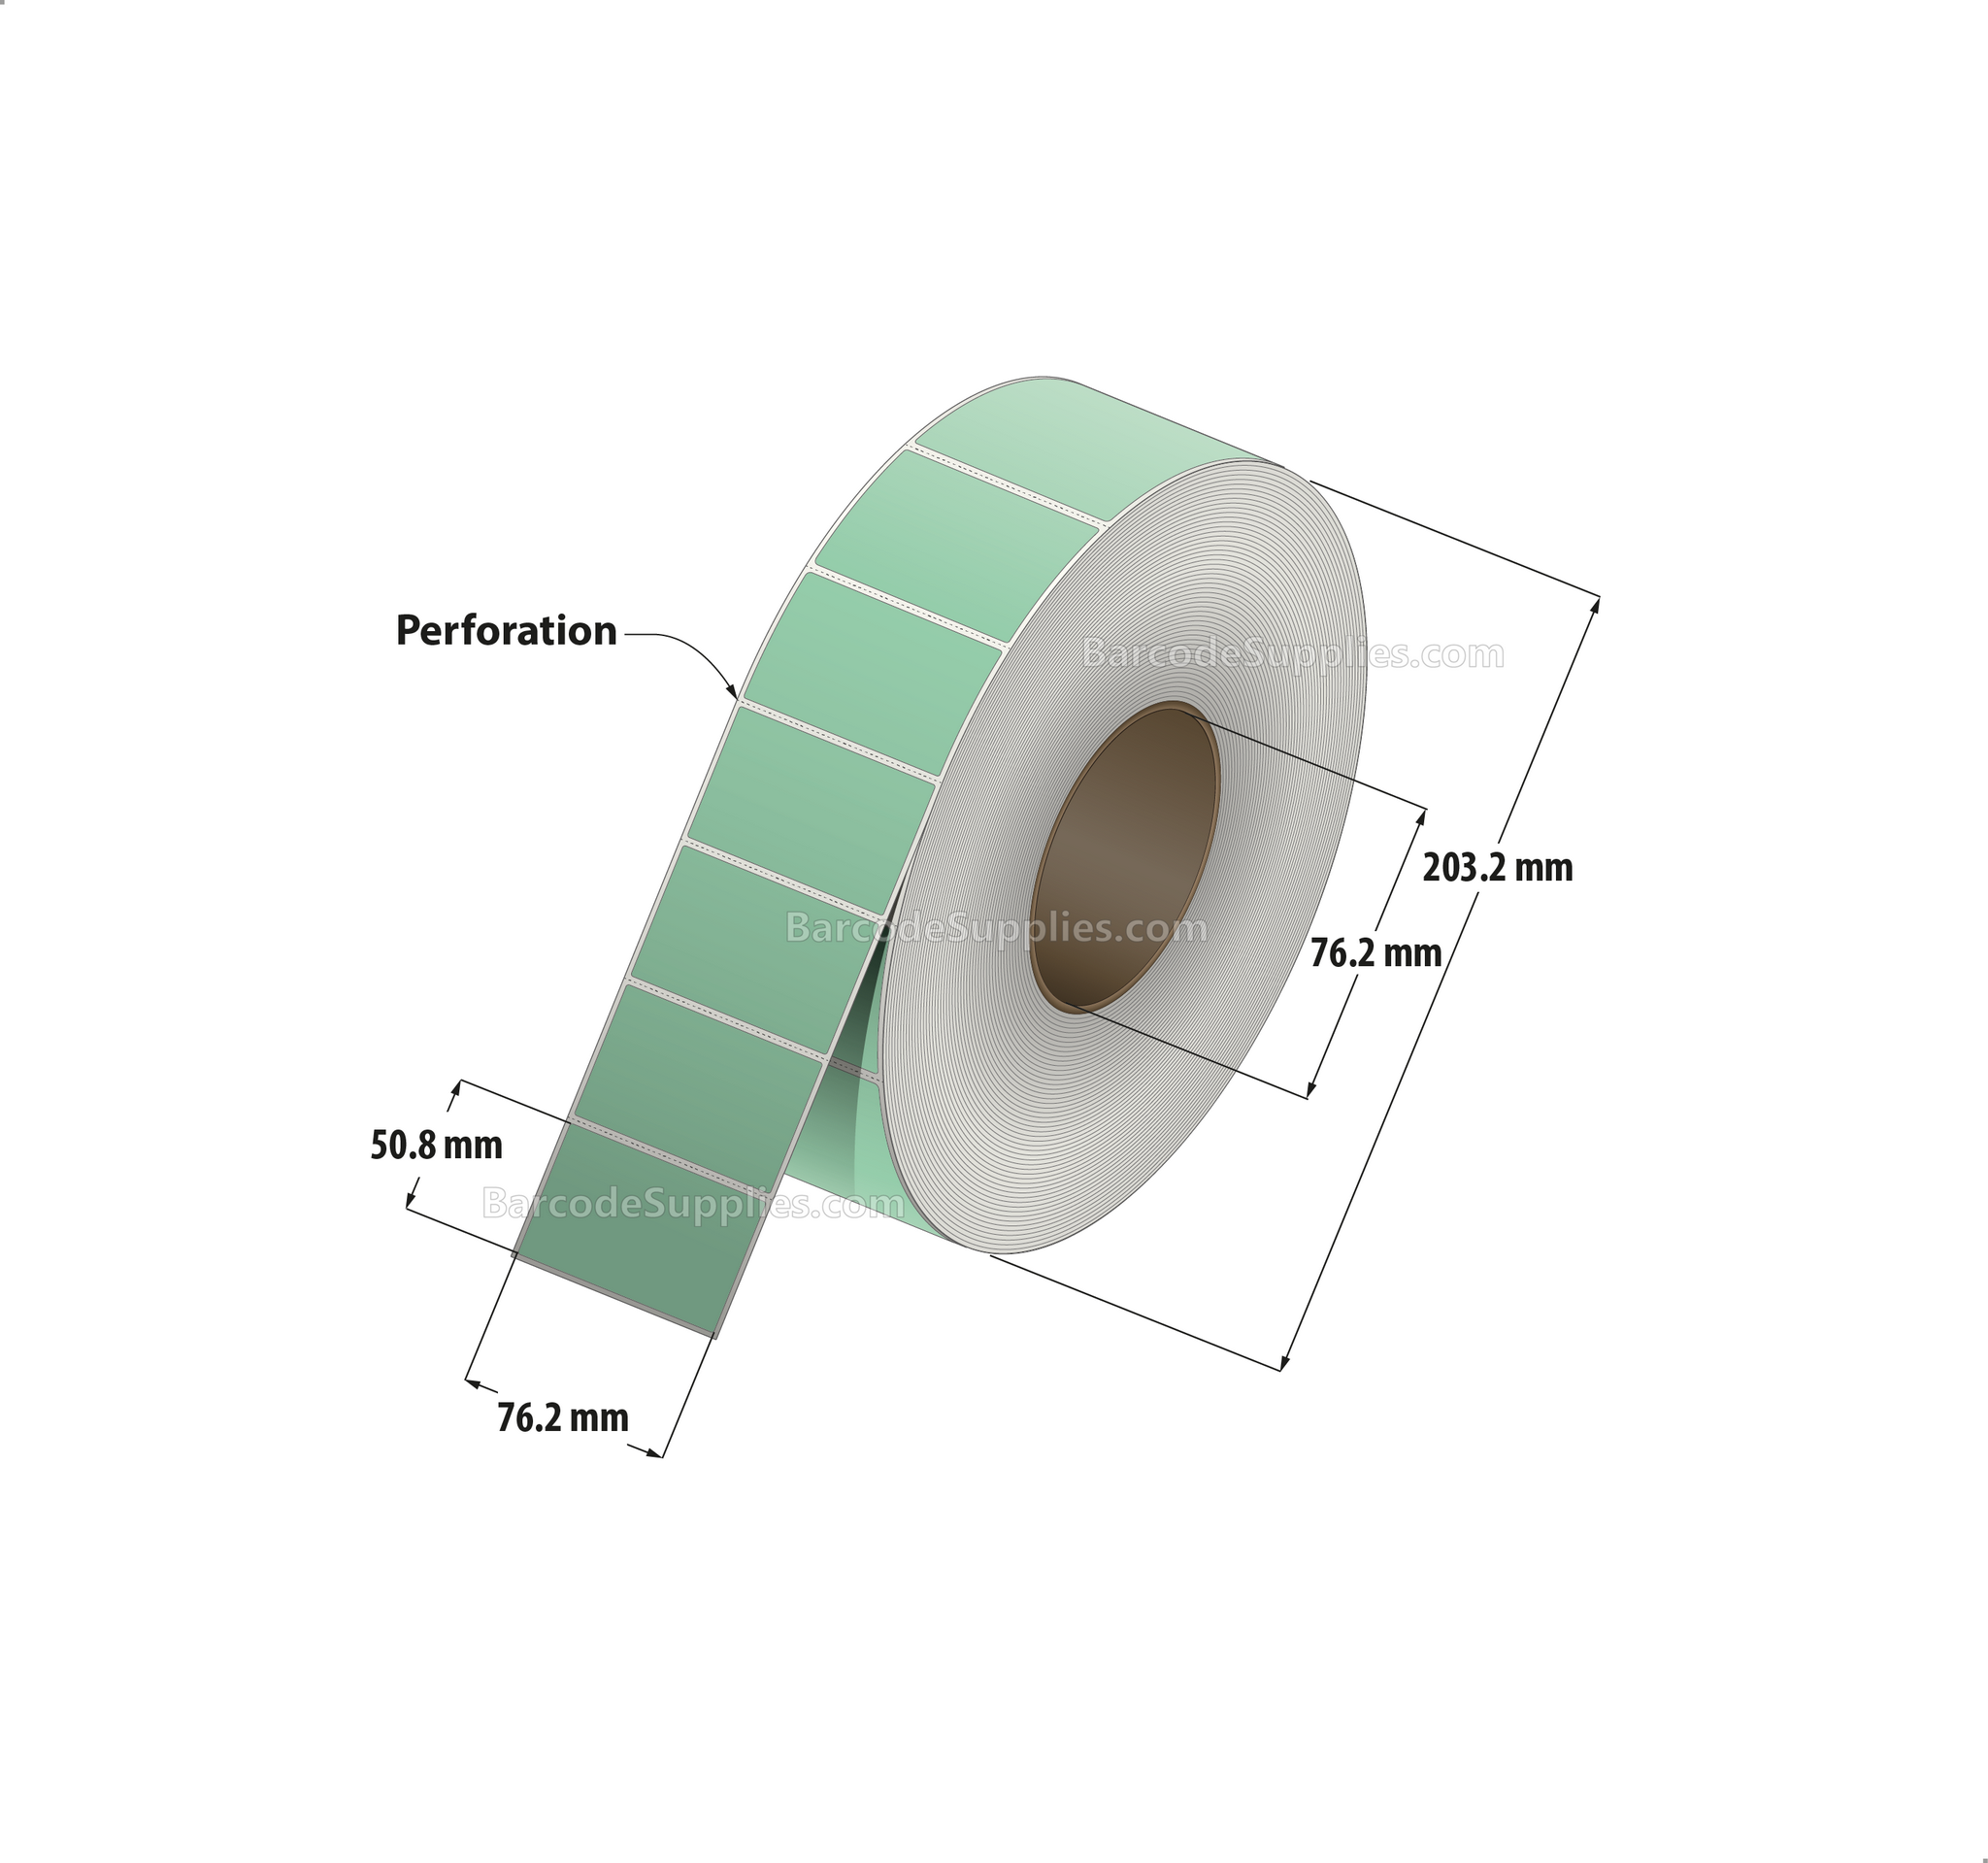 3 x 2 Thermal Transfer 345 Green Labels With Permanent Adhesive - Perforated - 2900 Labels Per Roll - Carton Of 8 Rolls - 23200 Labels Total - MPN: RFC-3-2-2900-GR